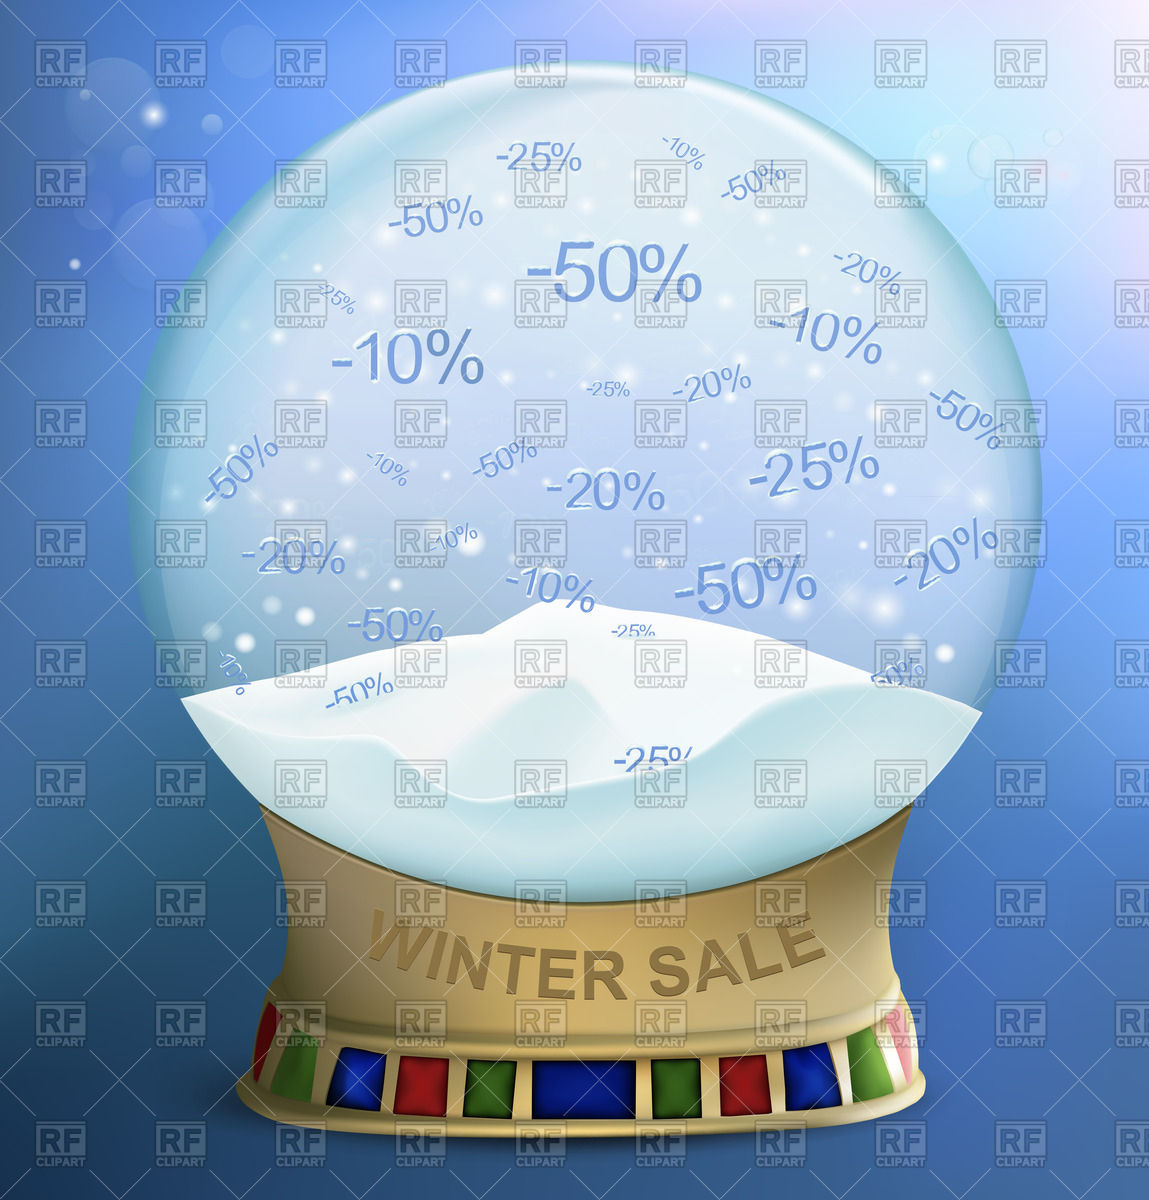 Discounts   Winter Sale Download Royalty Free Vector Clipart  Eps